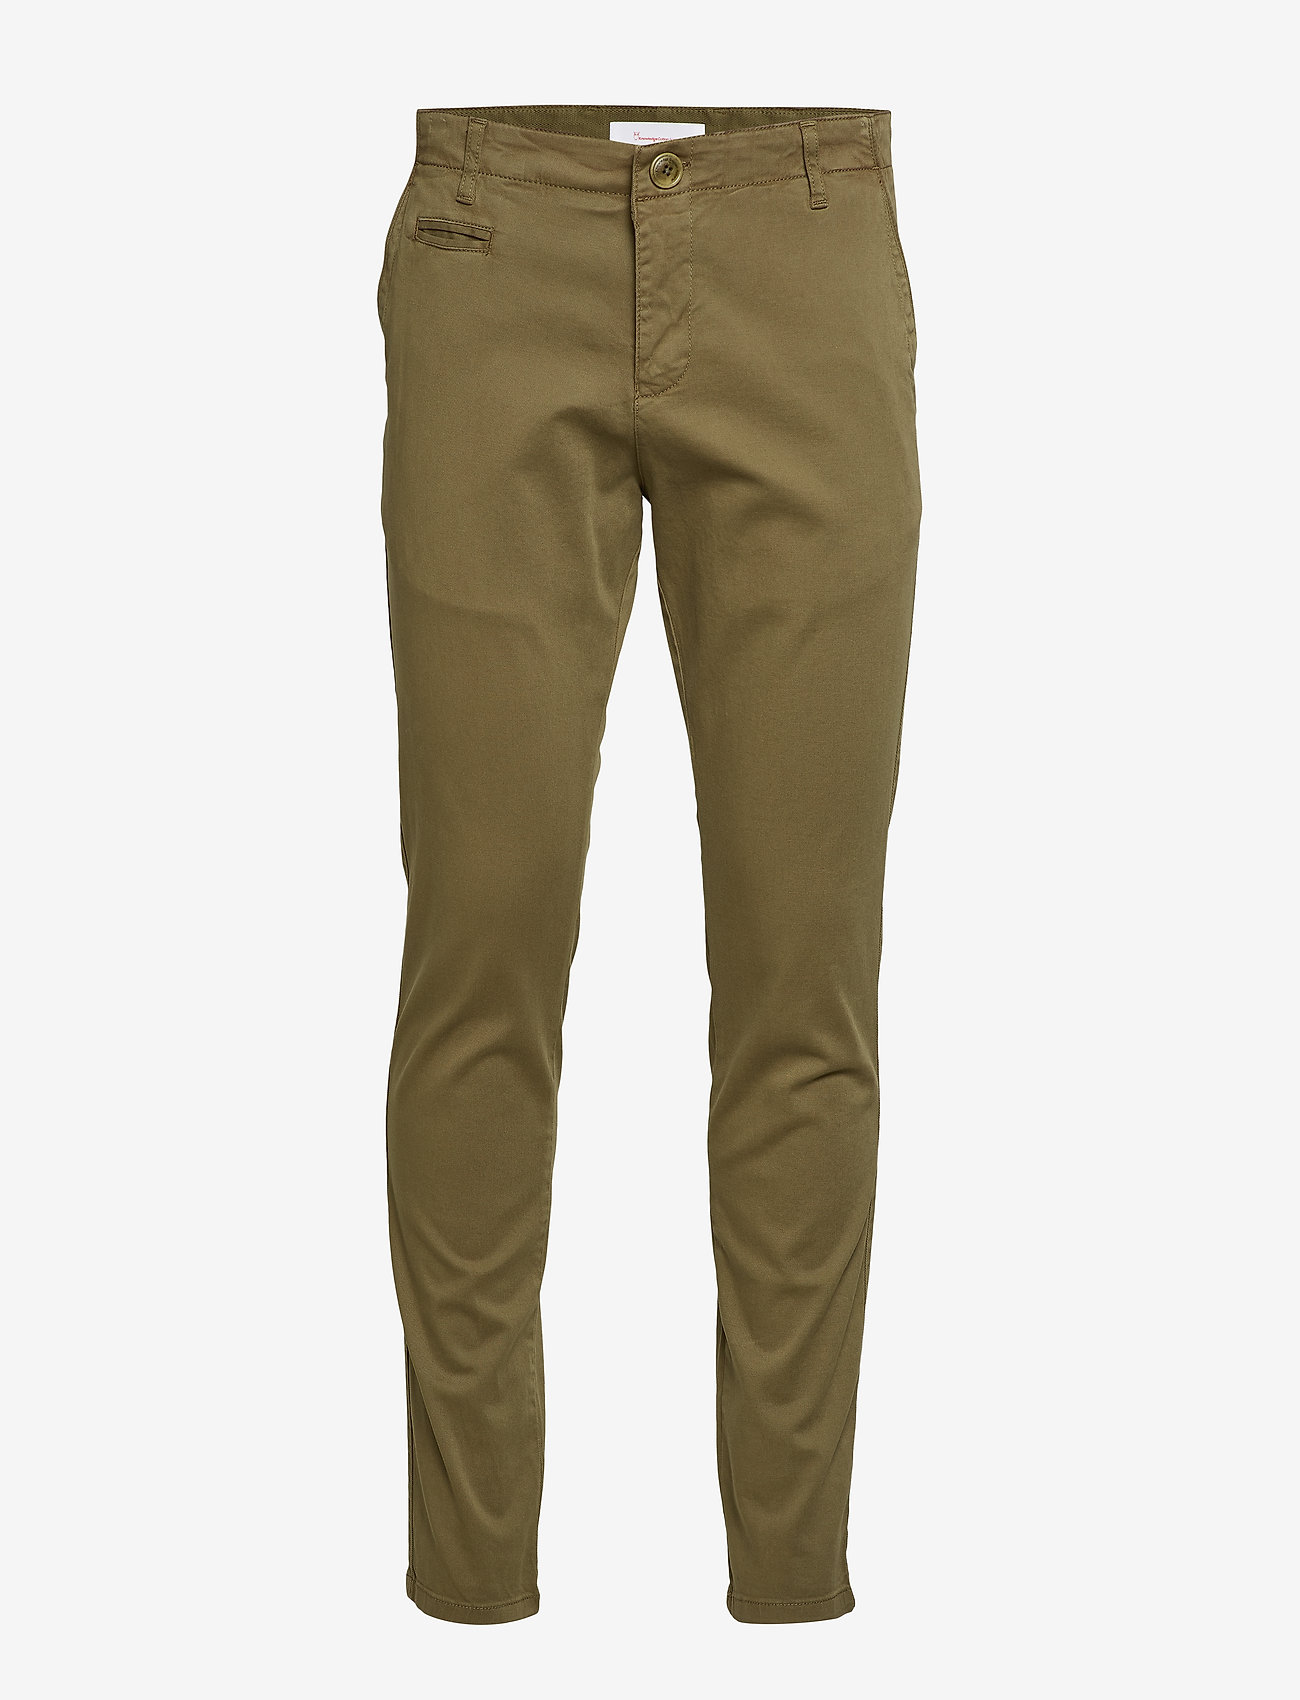 Knowledge Cotton Apparel - JOE slim stretched chino pant - GOT - chinos - burned olive - 0